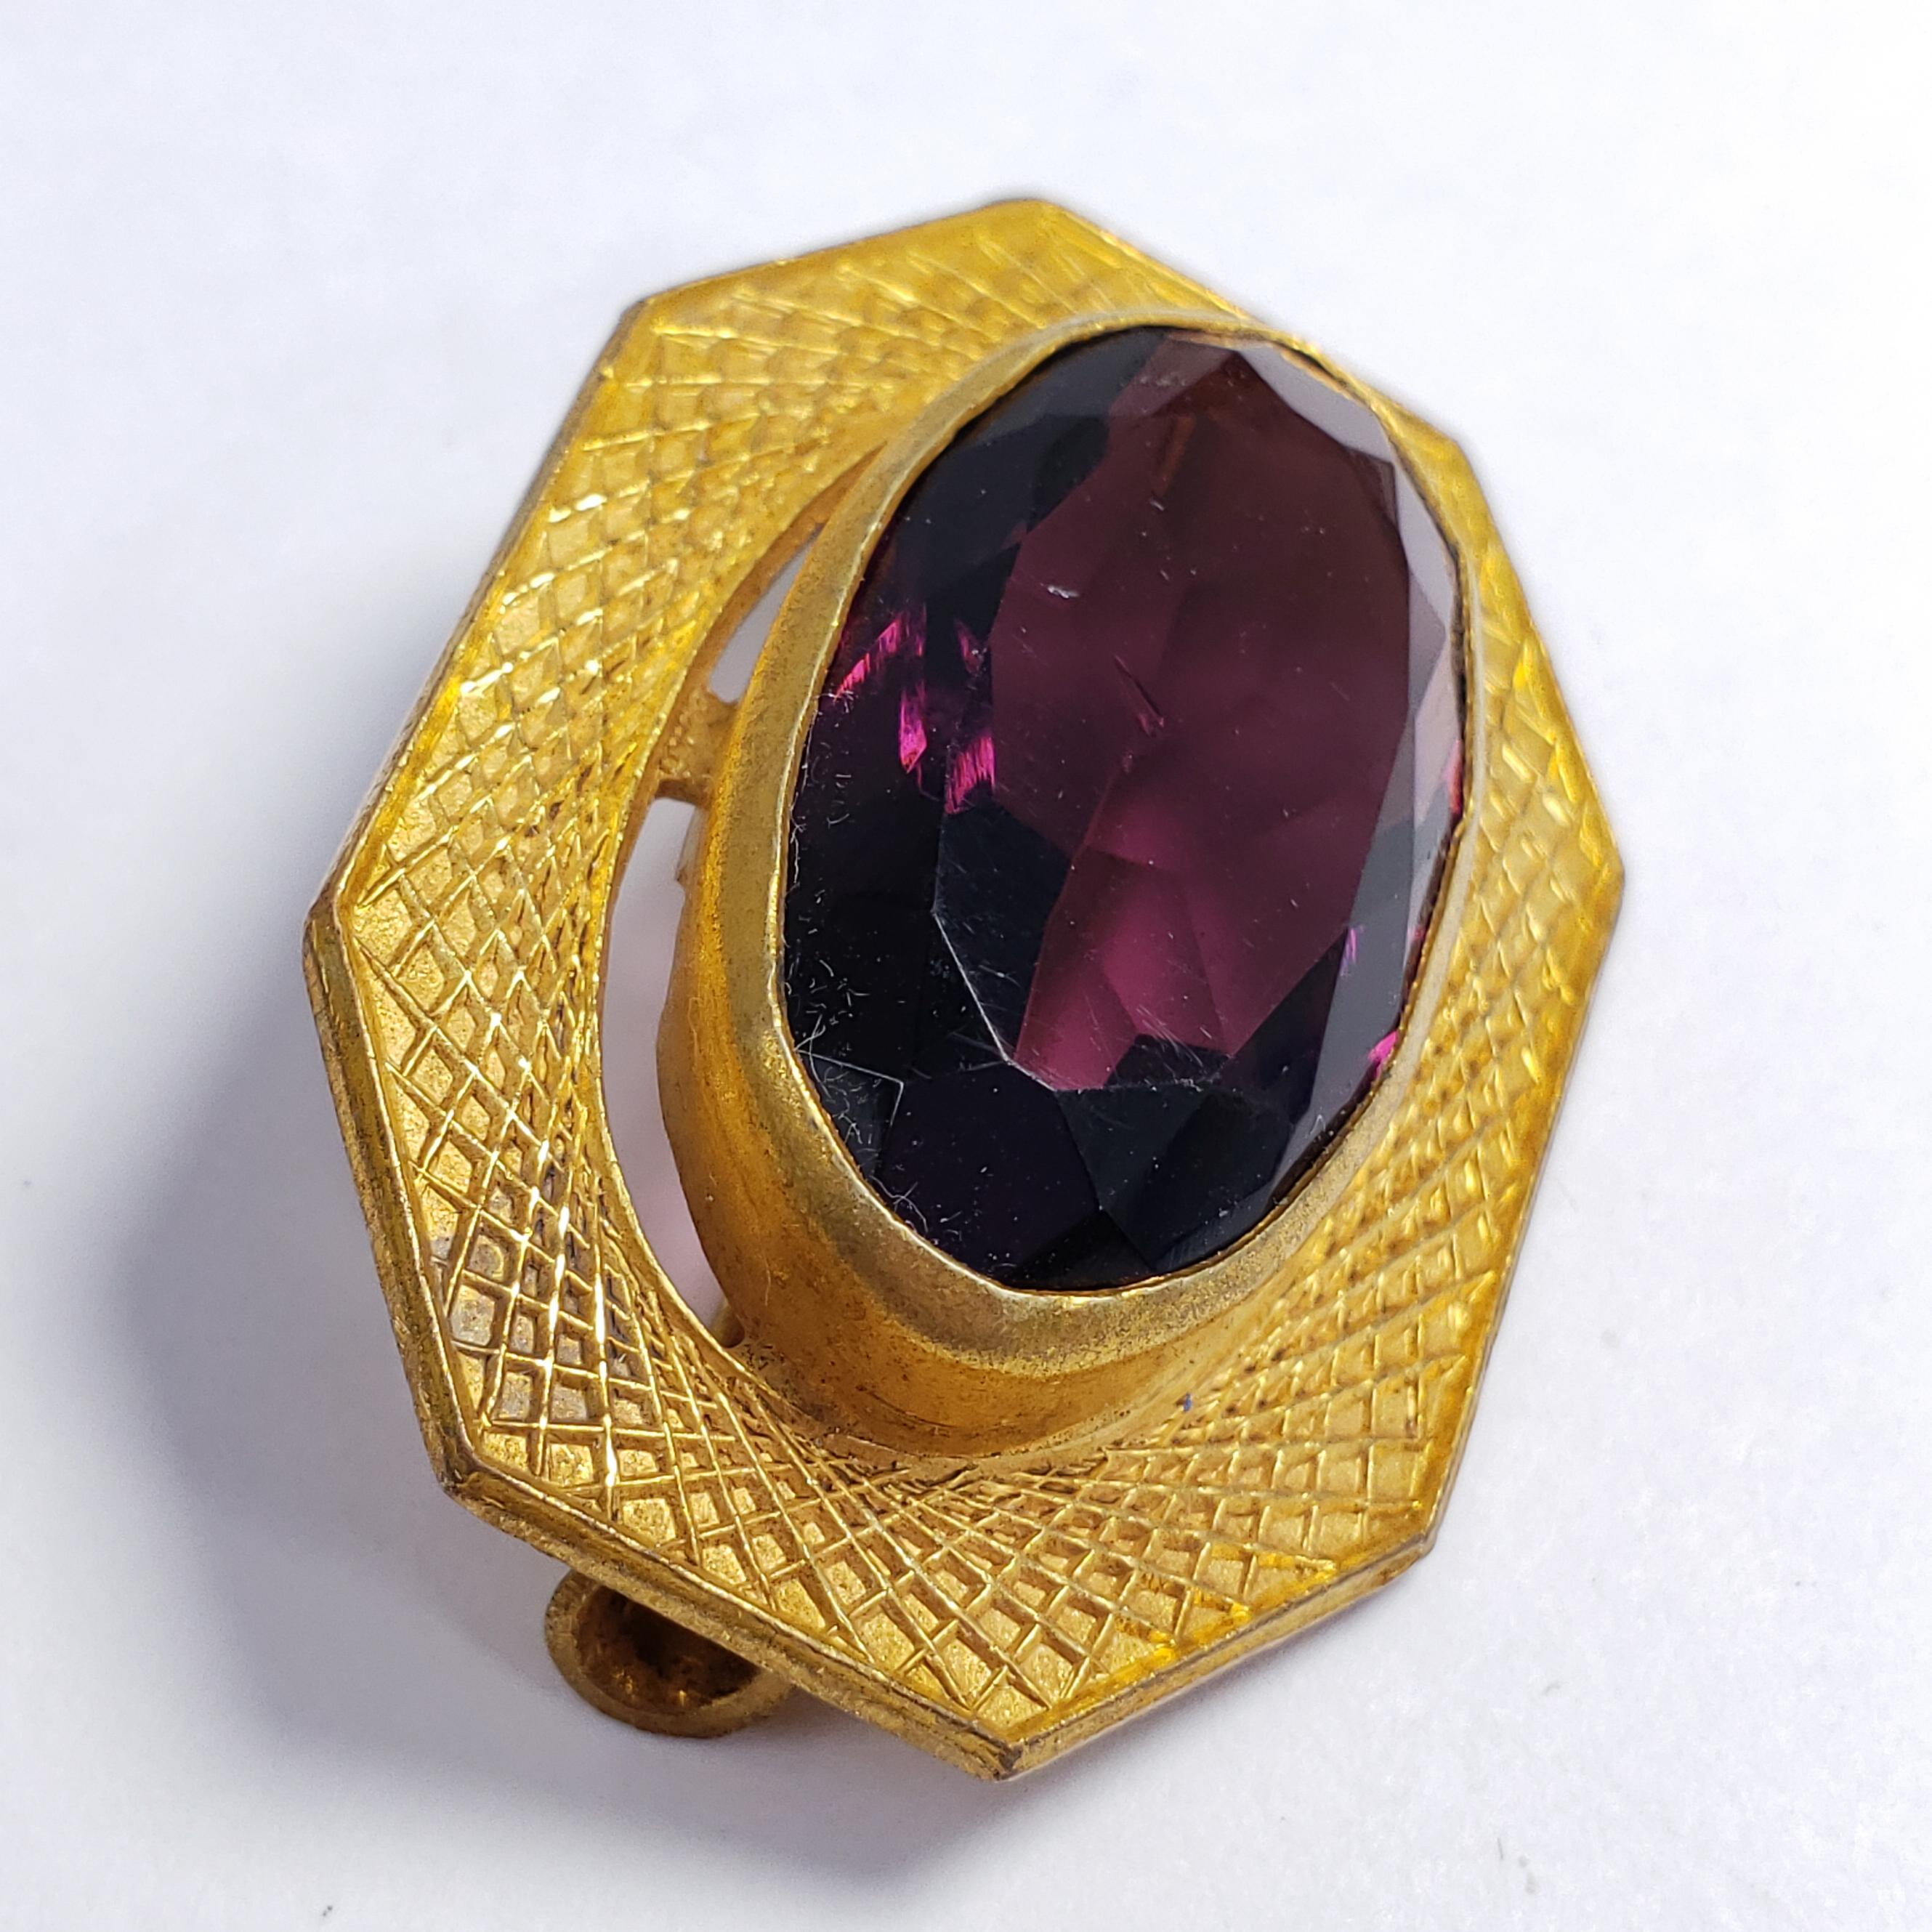 An elegant art-deco pin brooch, featuring an amethyst-colored open-back crystal centerpiece in a goldtone bezel. Features a vintage-style pin hook, typical of the era.